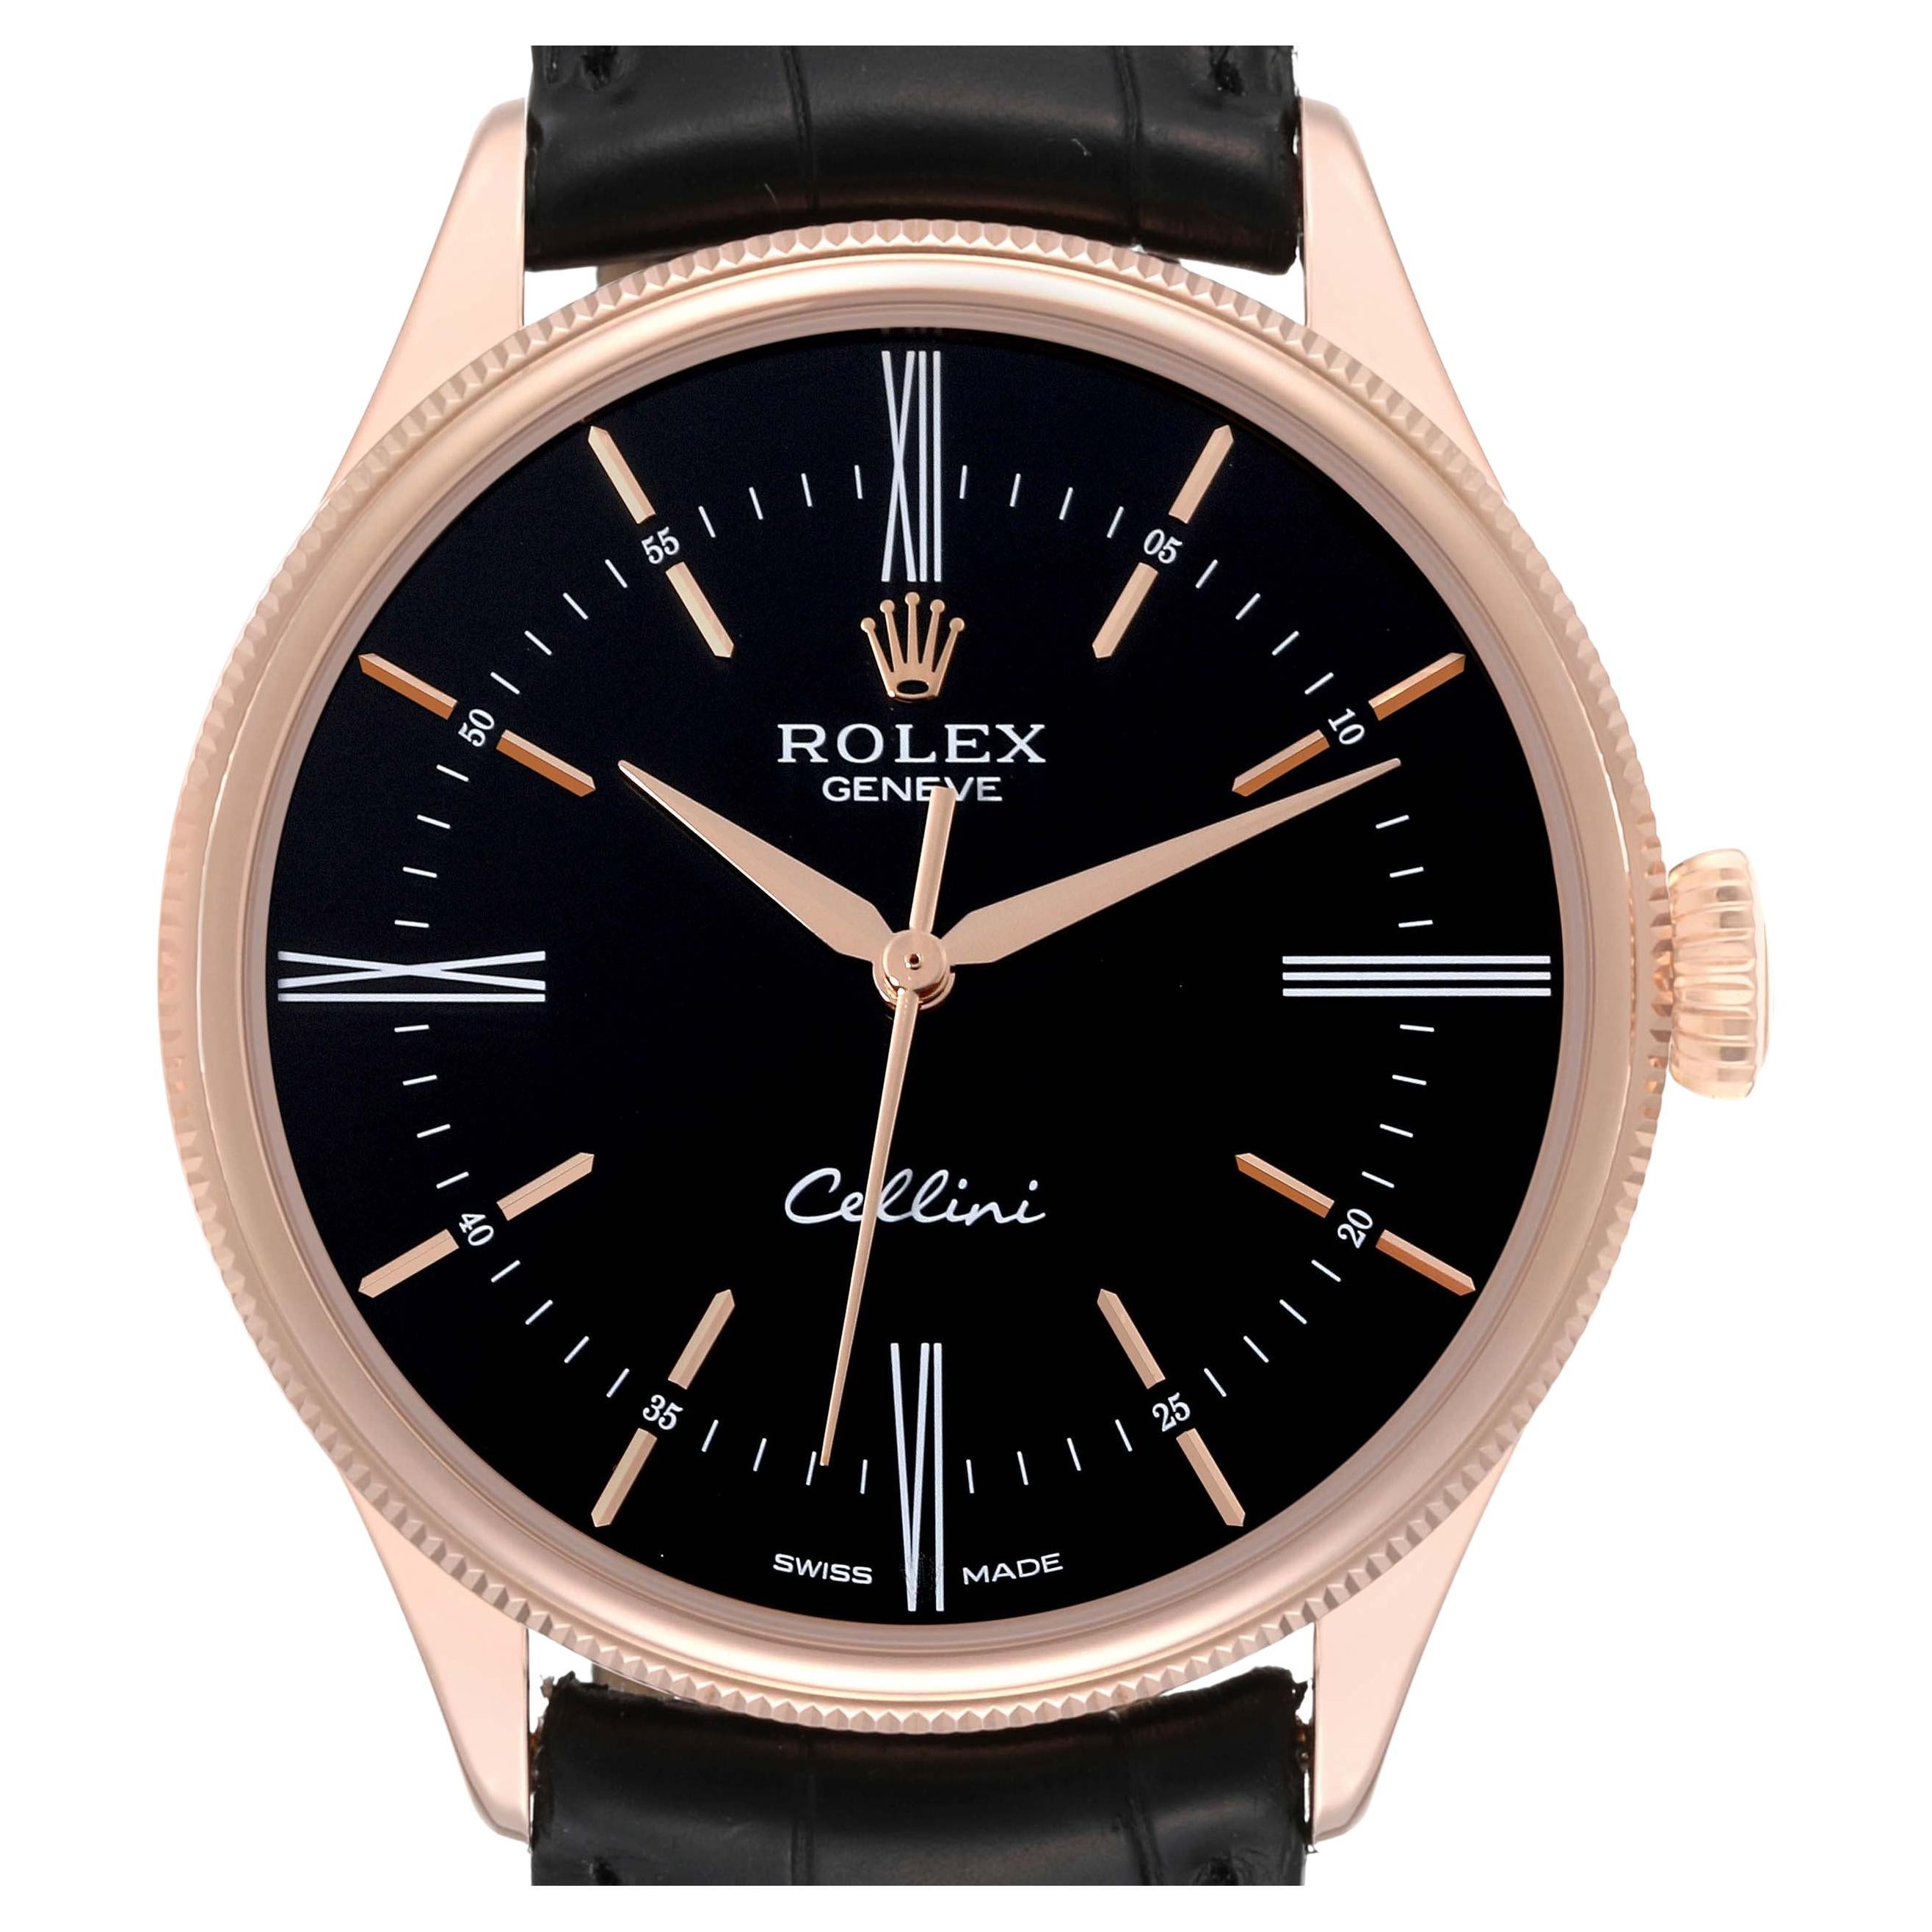 Rolex Cellini Time Rose Gold Black Dial Mens Watch 50505 Box Card